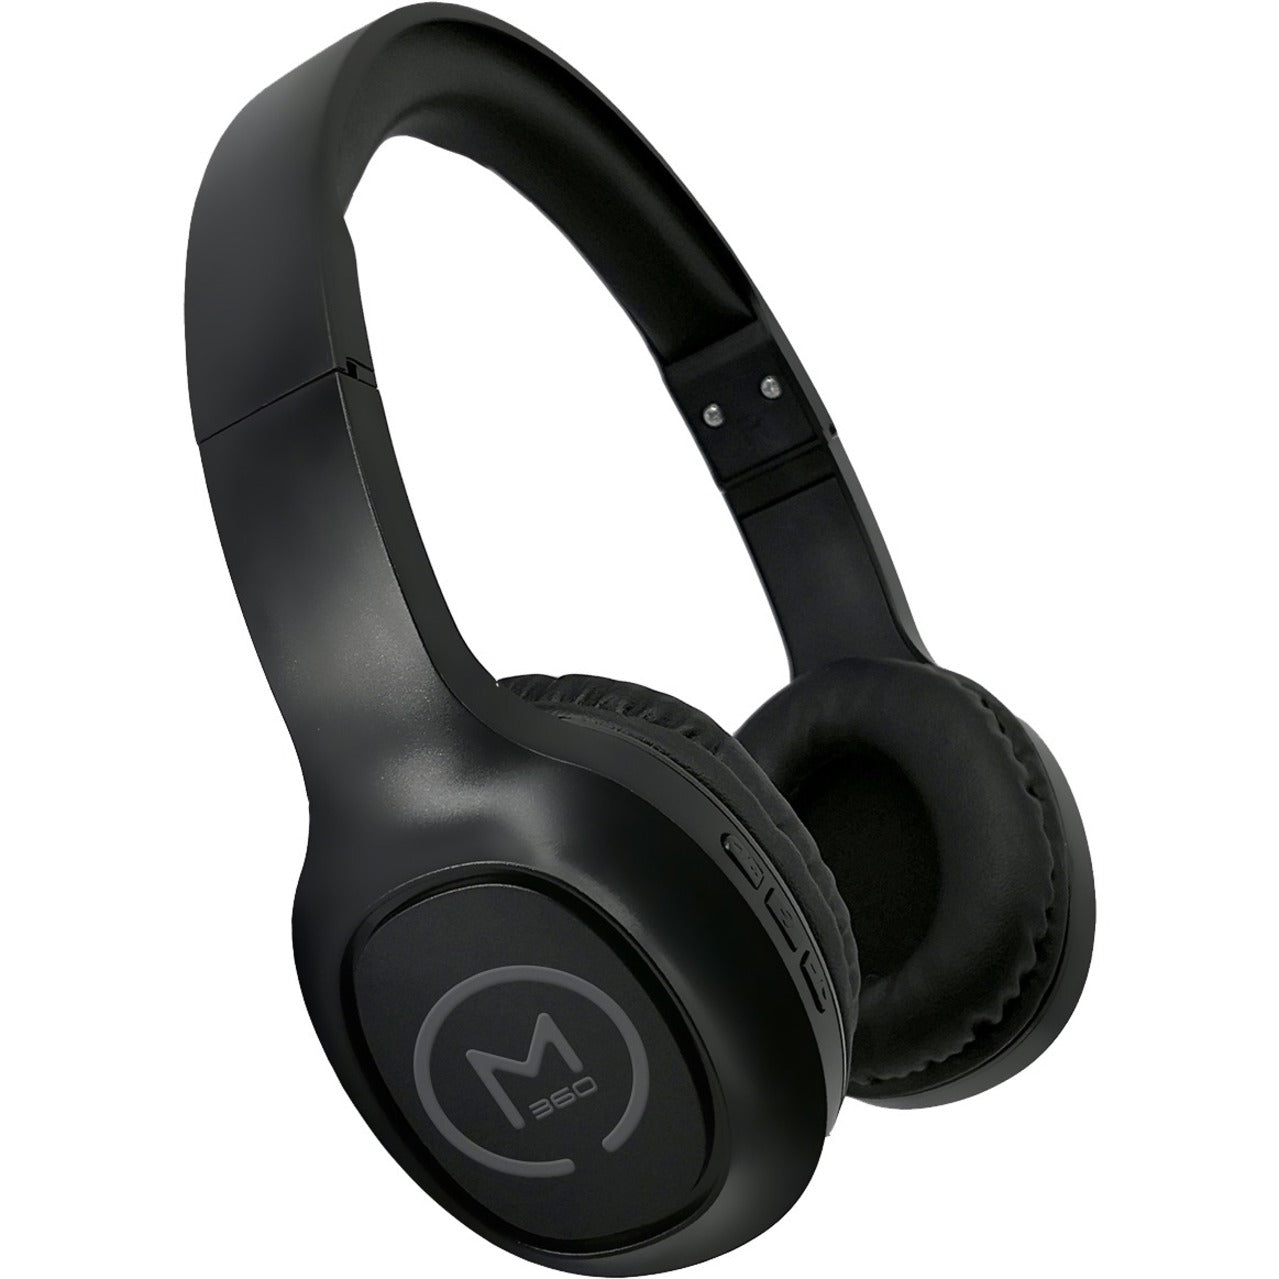 Morpheus 360 HP4500B Wireless Headphone, Stereo, Comfortable, Black with Grey Accents